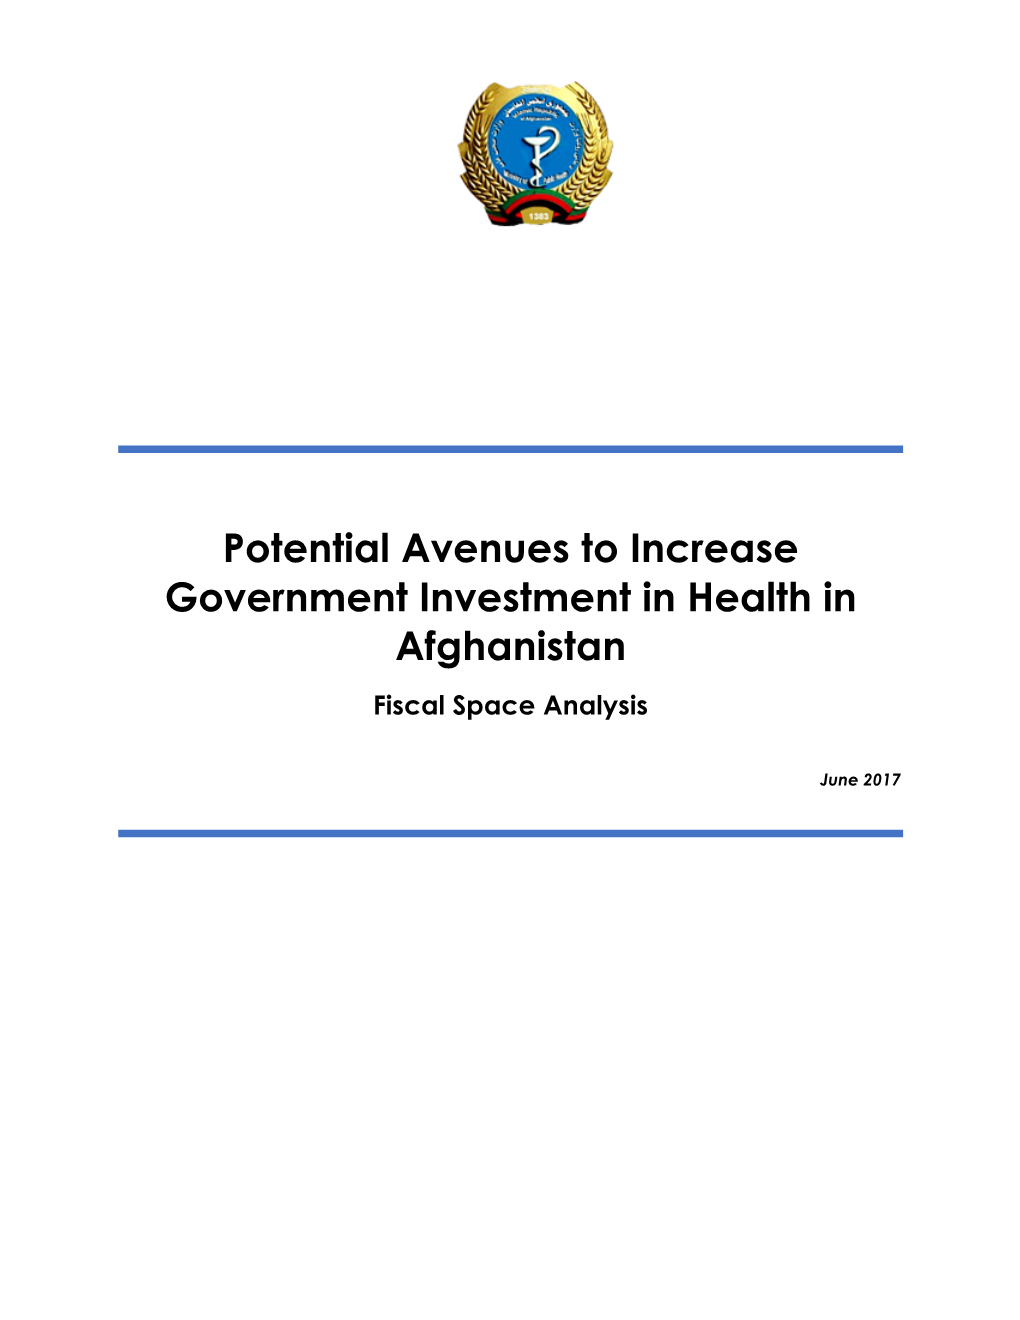 Potential Avenues to Increase Government Investment in Health in Afghanistan Fiscal Space Analysis